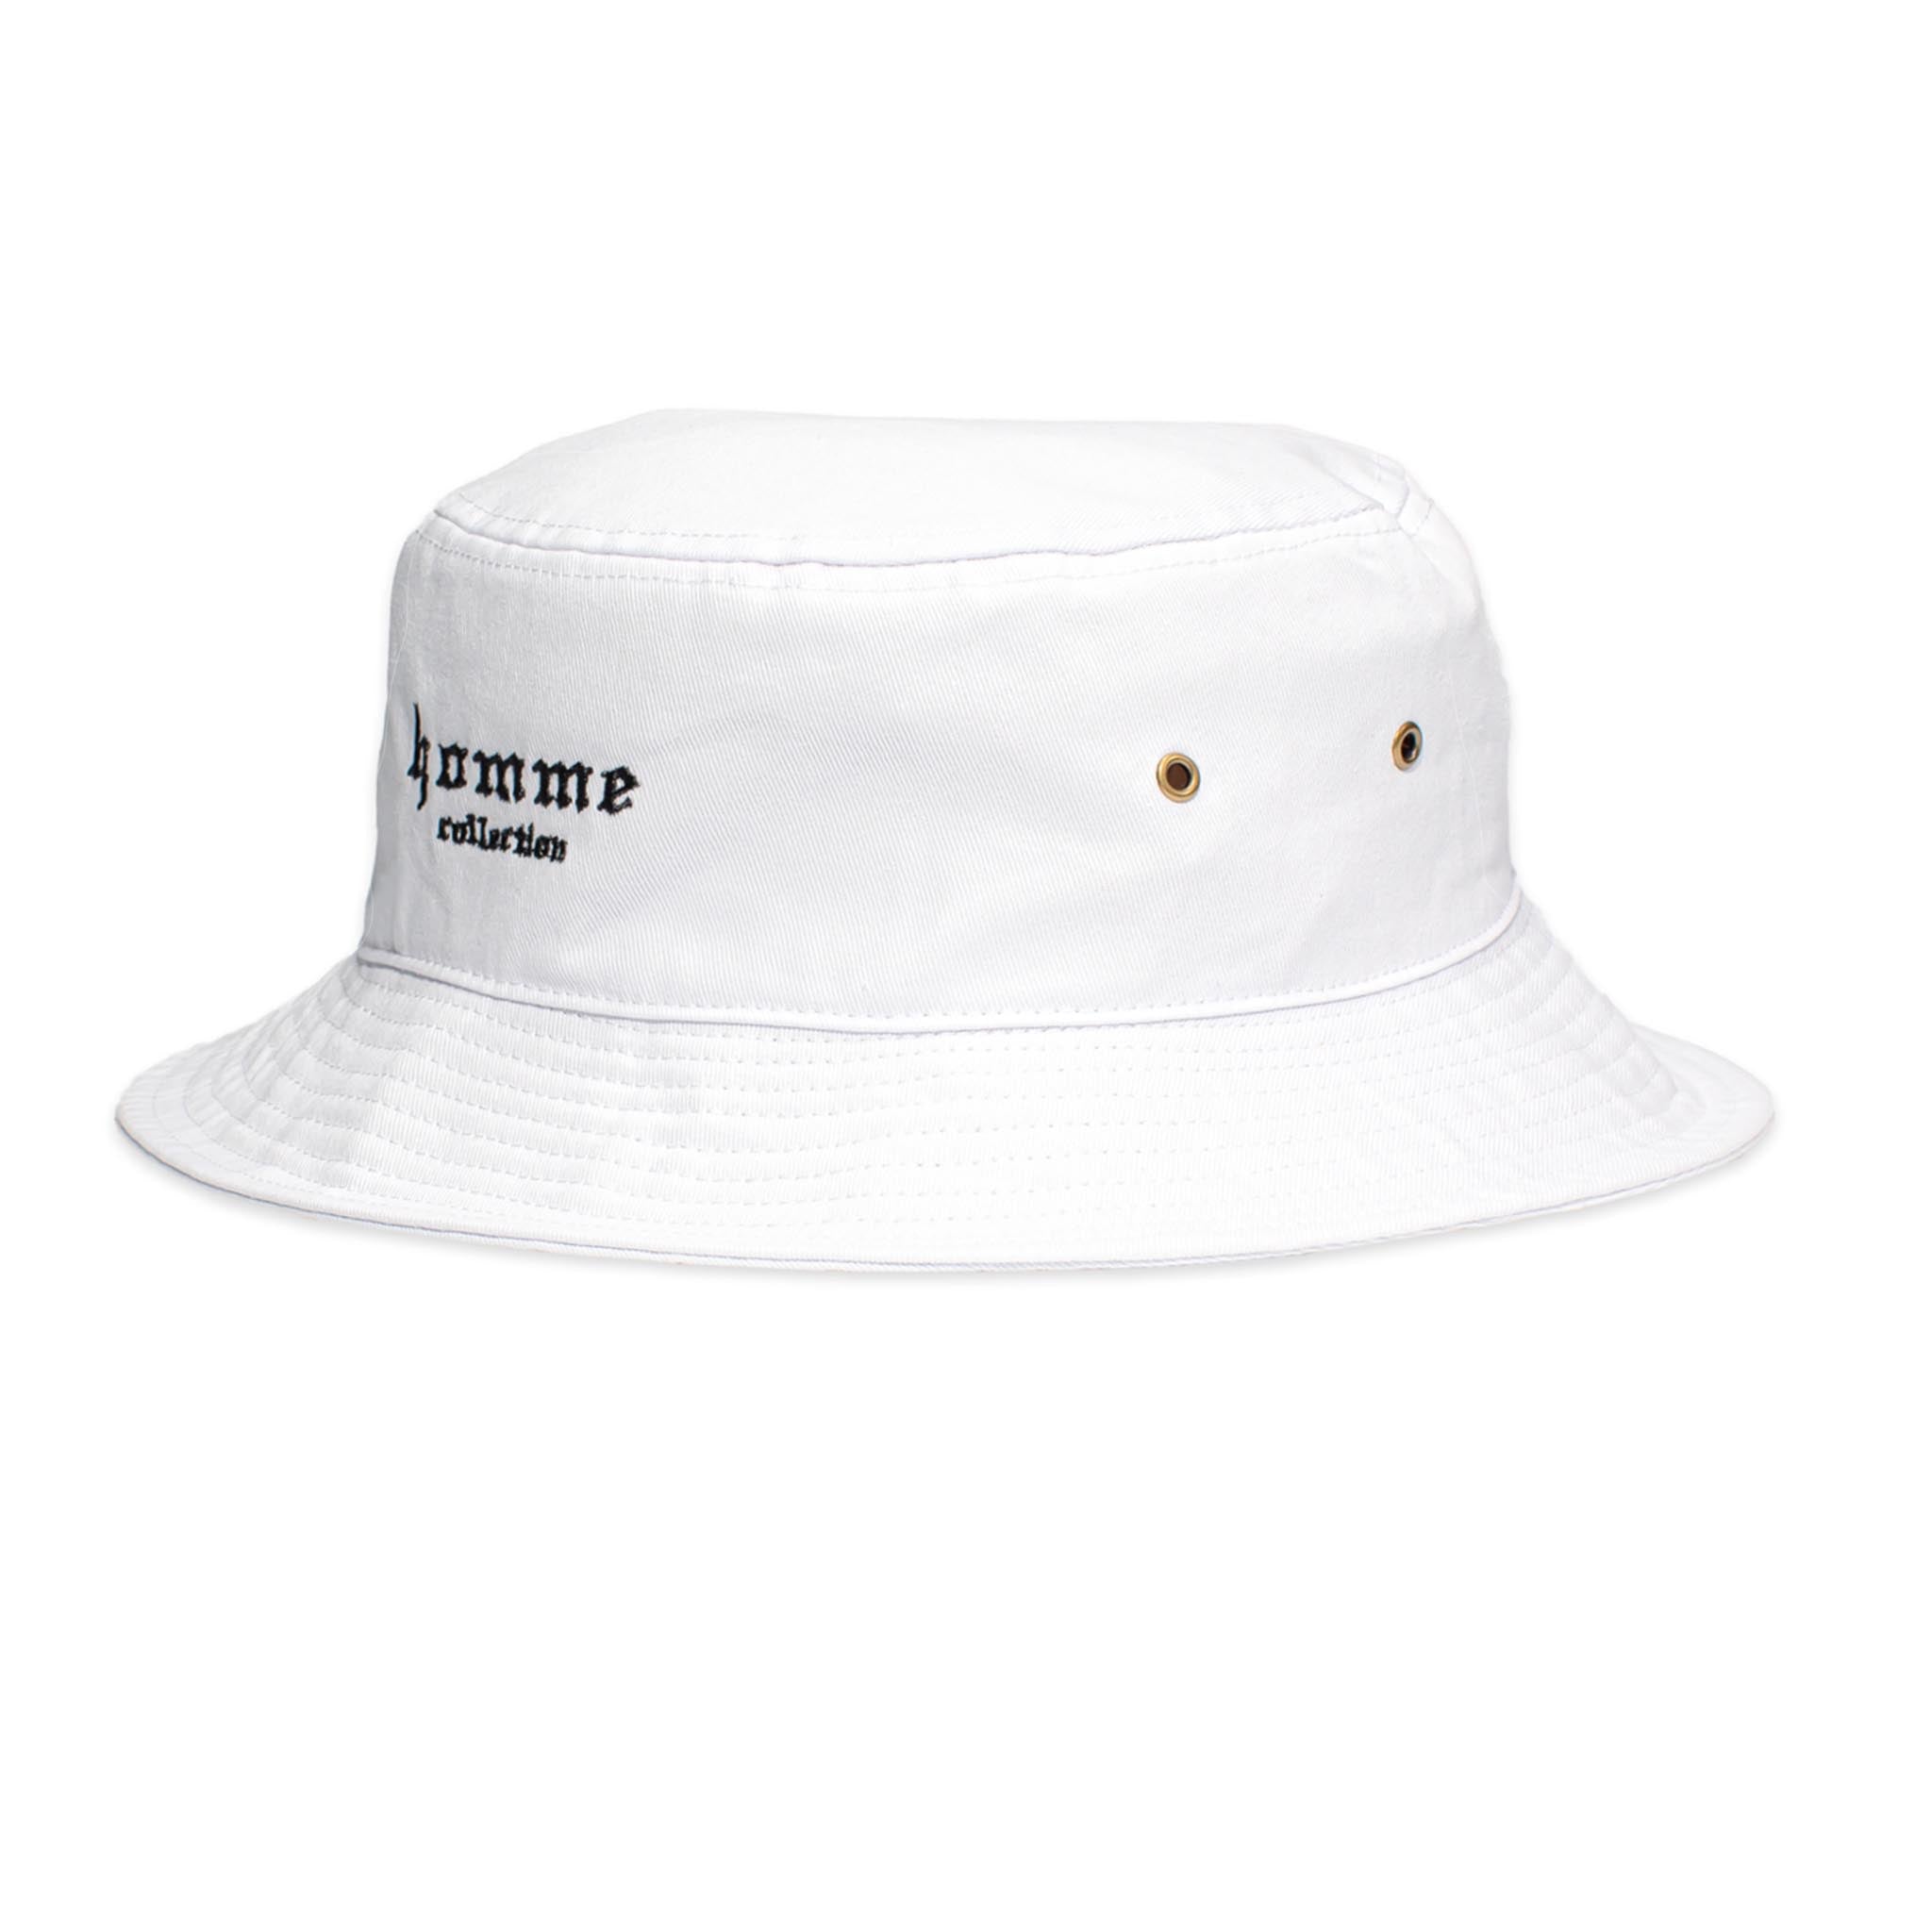 HOMME+ Collection Bucket Hat White